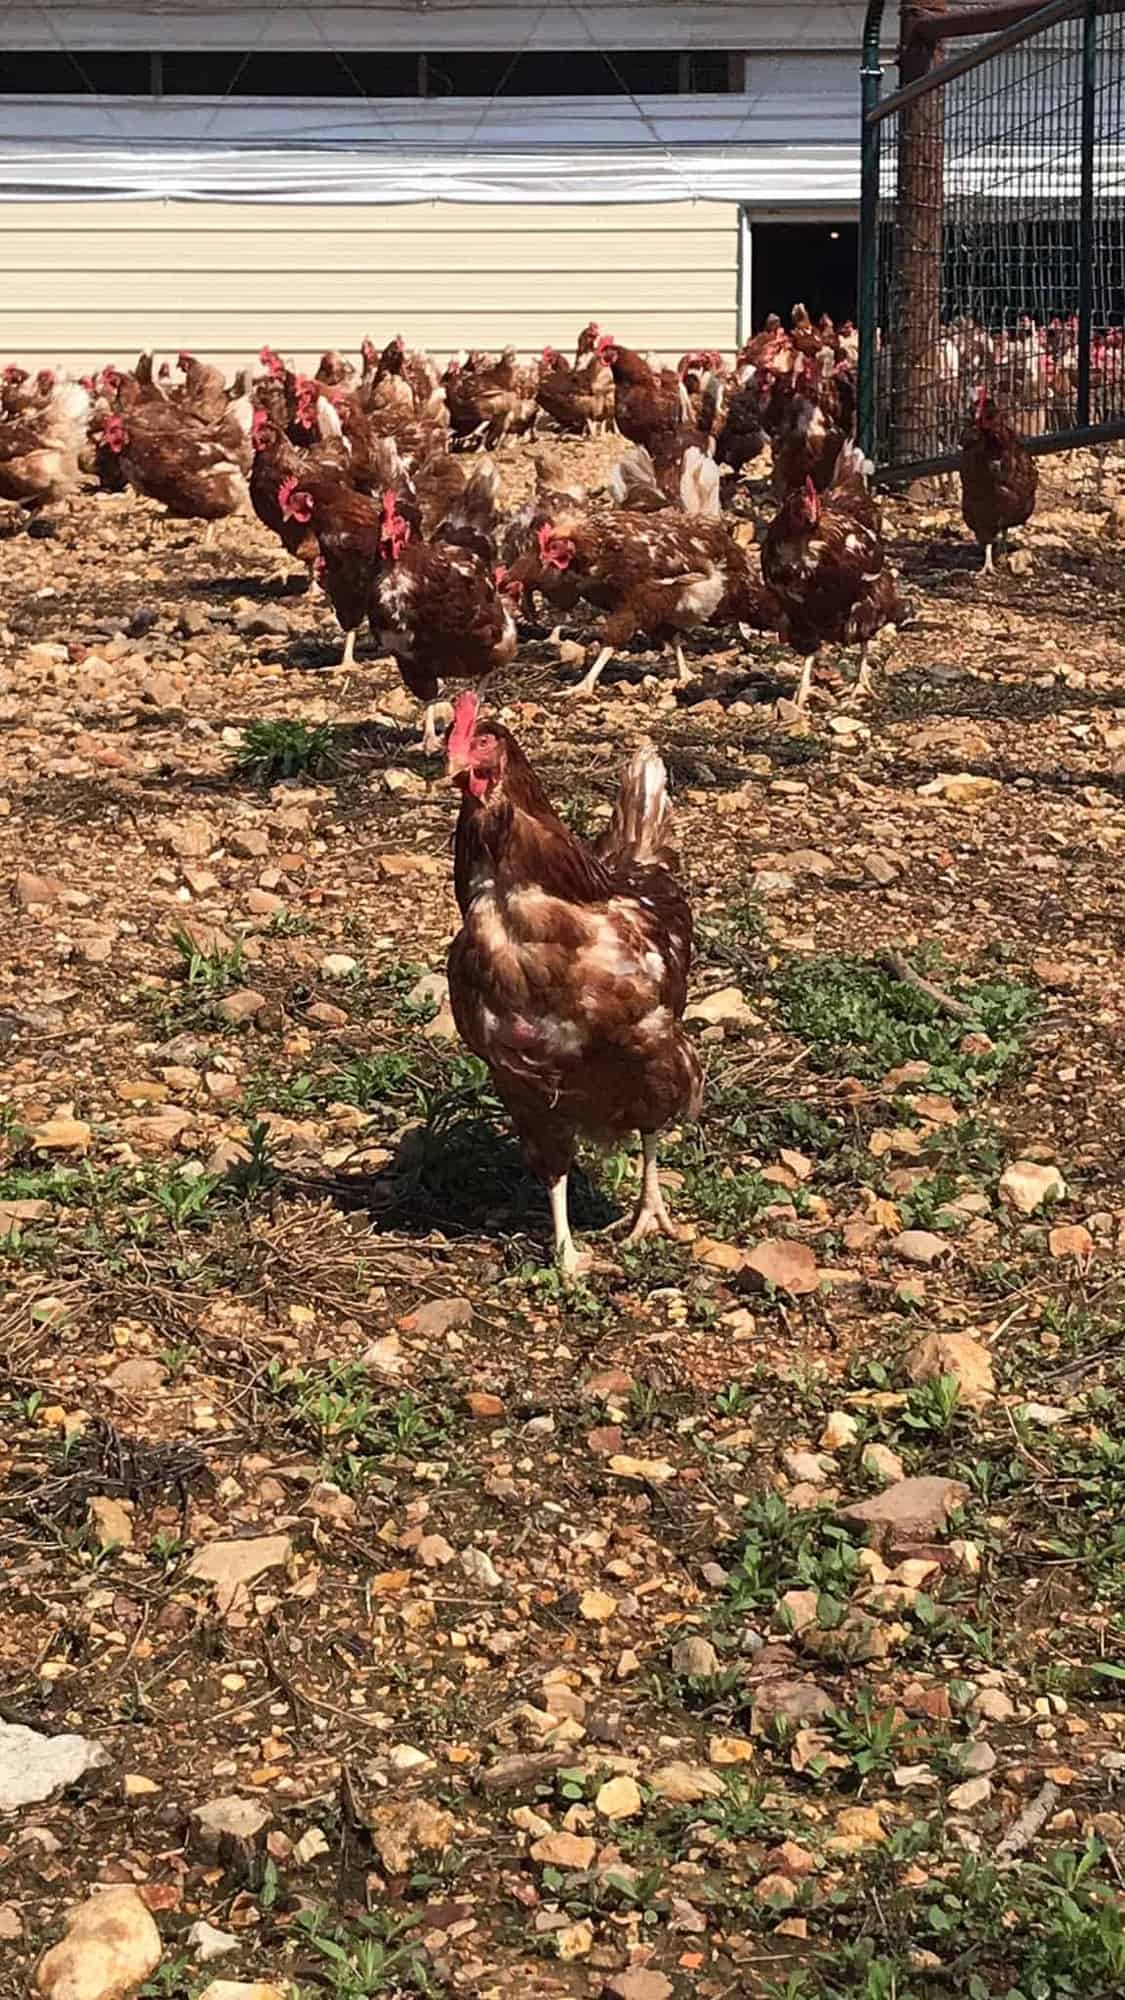 Vital Farms Tour Recap - Sharing how I saw first hand that Vital Farms is the real deal! They are raising happy, healthy hens and treating their employees with respect! | #Foodfaithfitness |